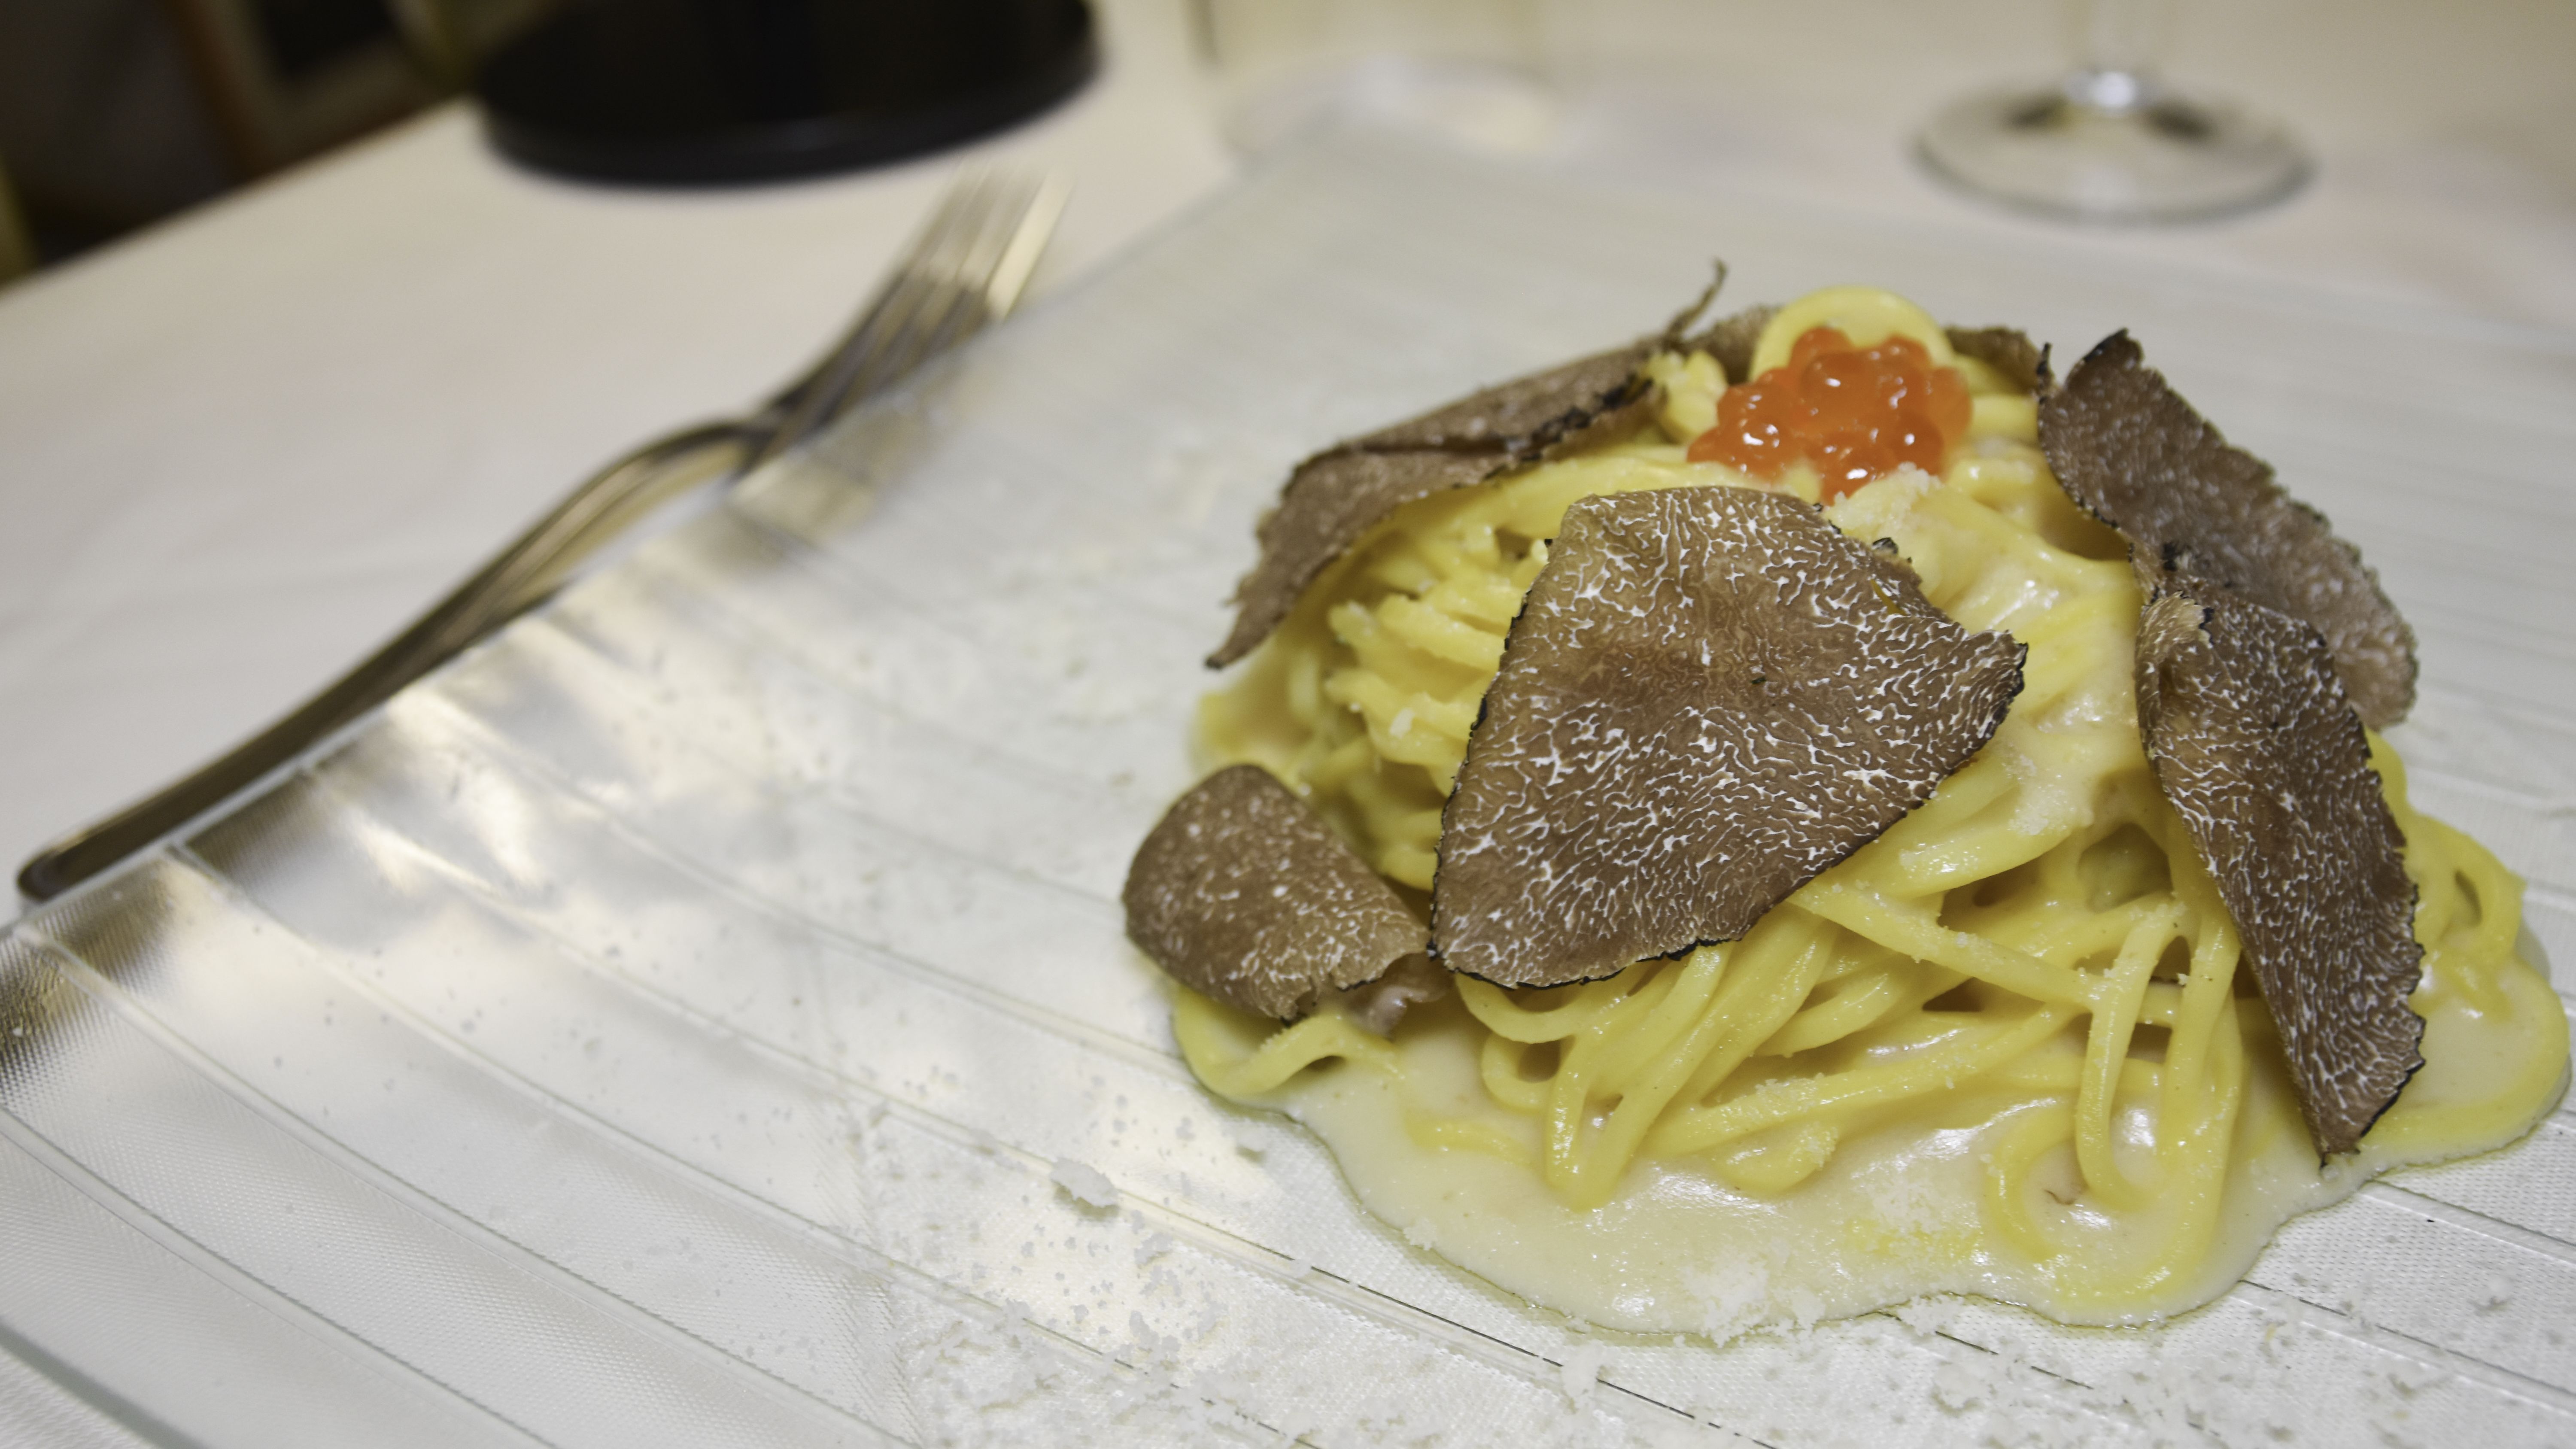 Osteria Barberini in Rome - Restaurant Reviews, Menu and Prices - TheFork